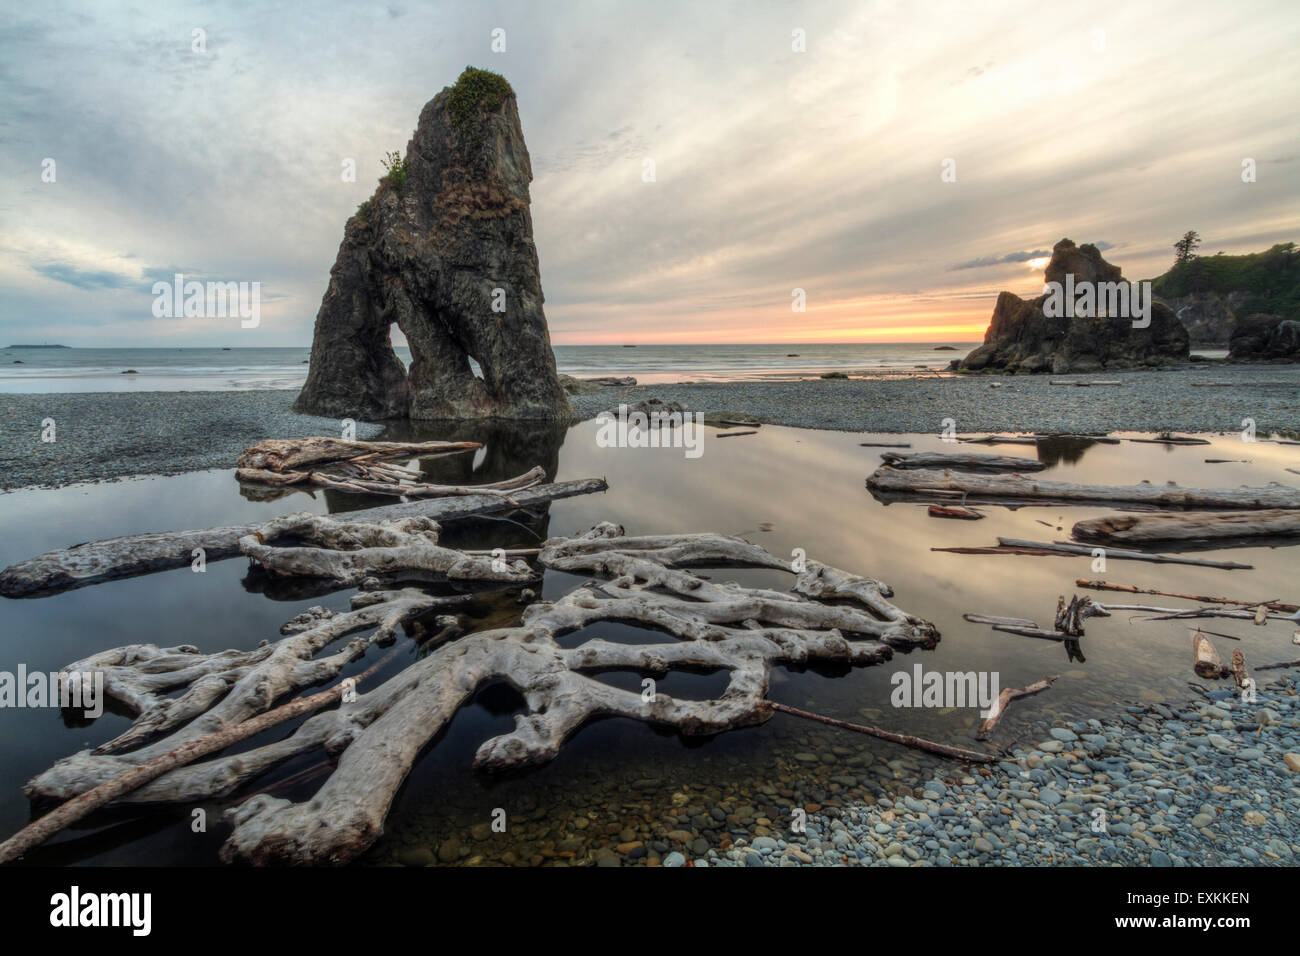 Sunset reflected in a slow moving stream, with sea stacks and driftwood, at Ruby Beach in Olympic National Park, Washington. Stock Photo